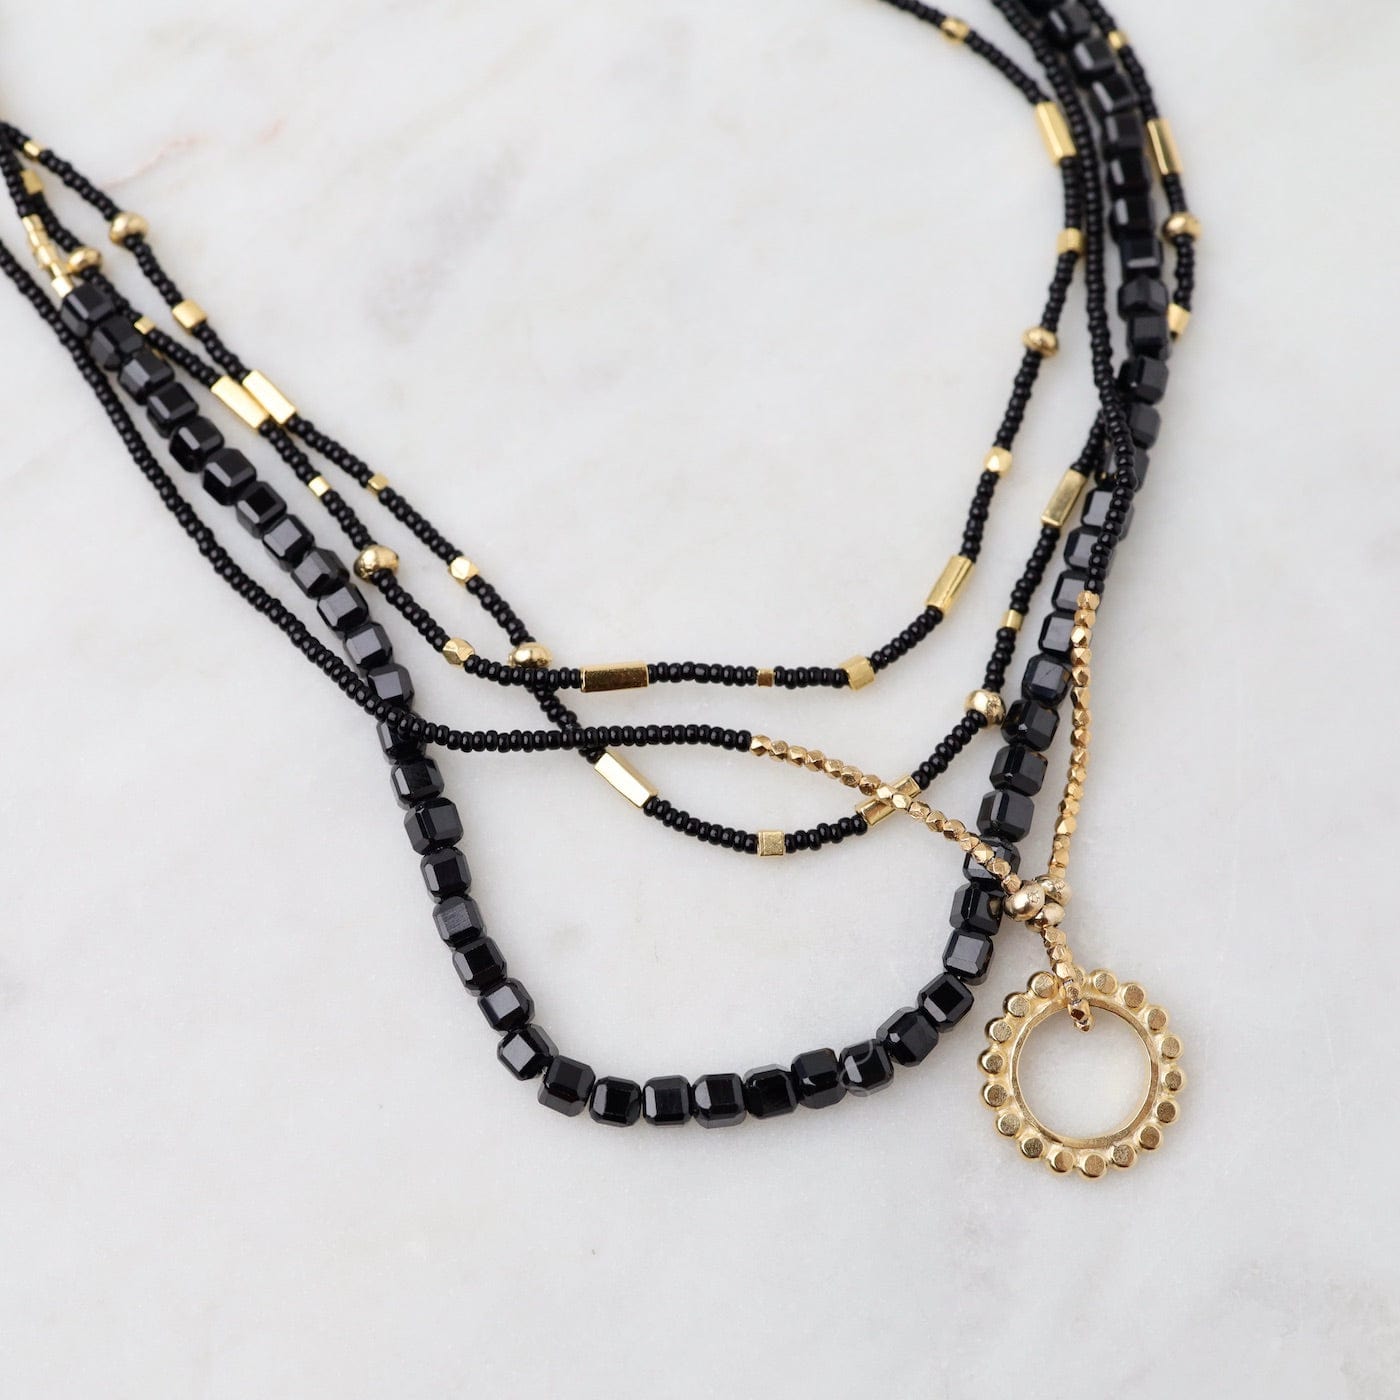 Black Seed Bead Necklace Choose Your Shade and Size Small 